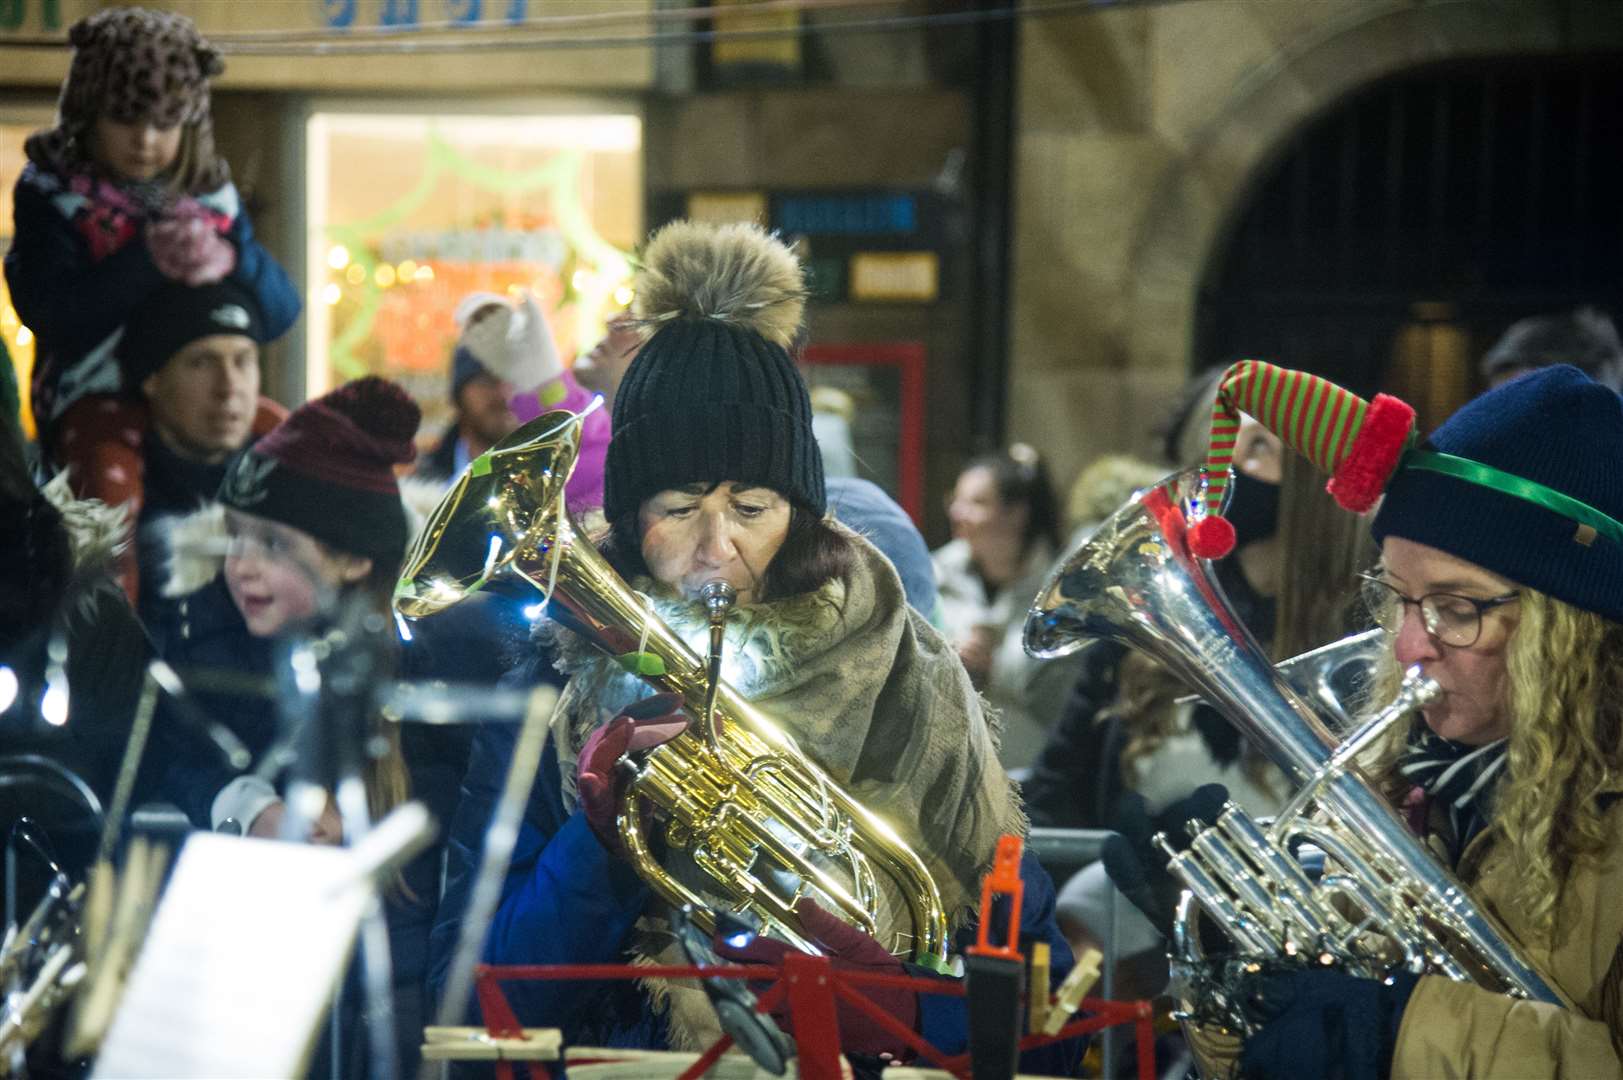 Elgin City Band entertained with Christmas standards.